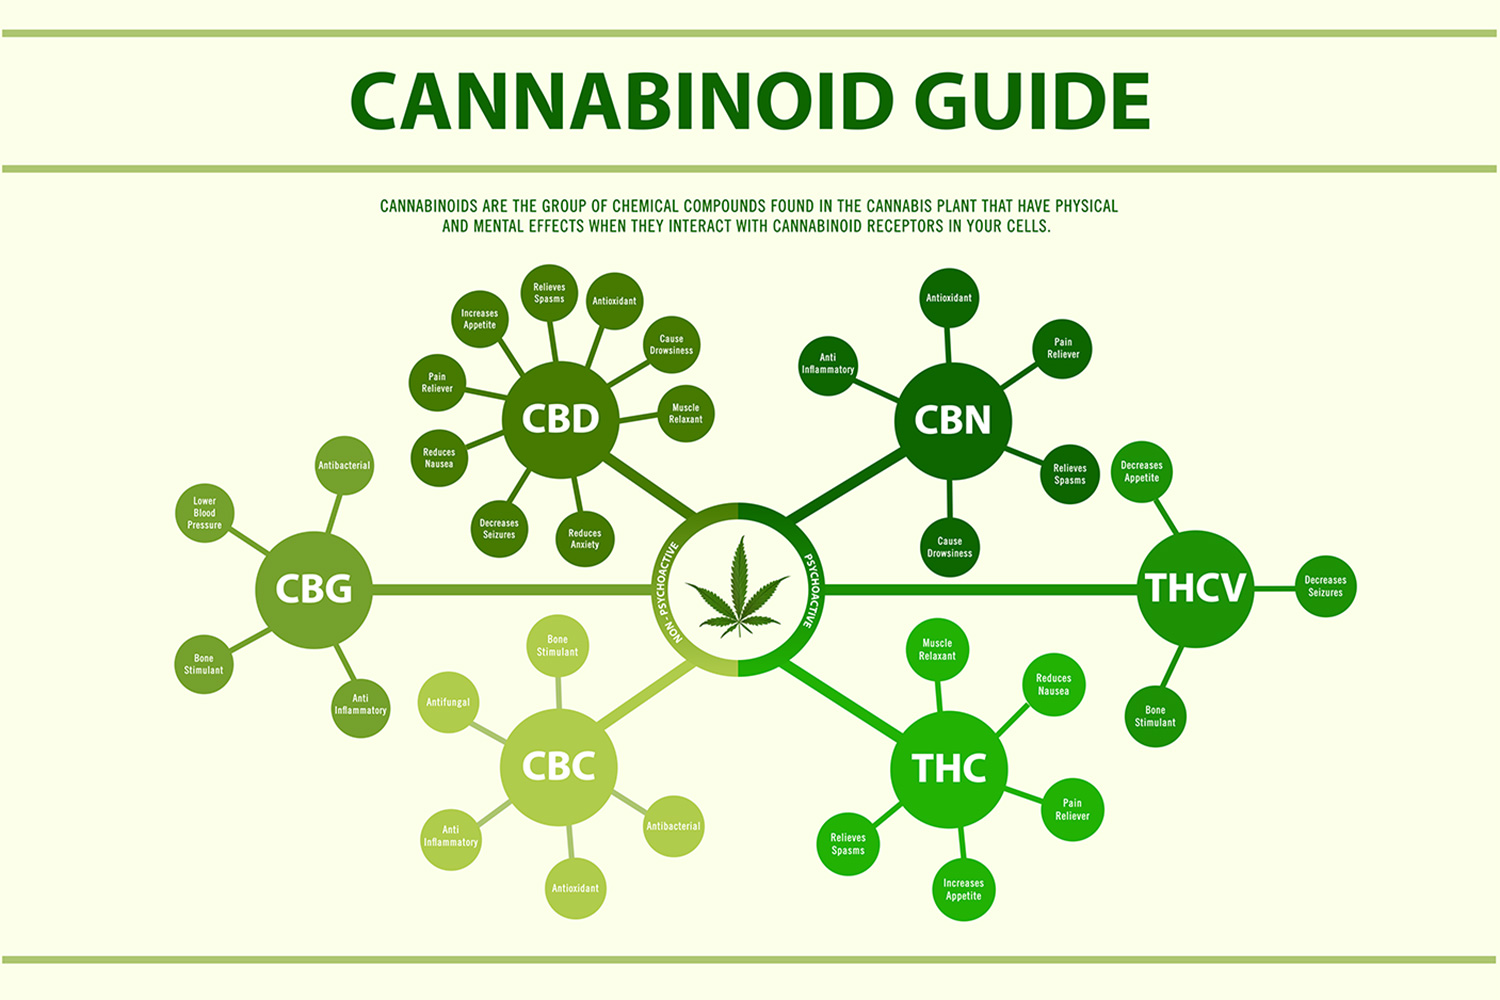 educational infographic describing benefits and qualities of various cannabinoids